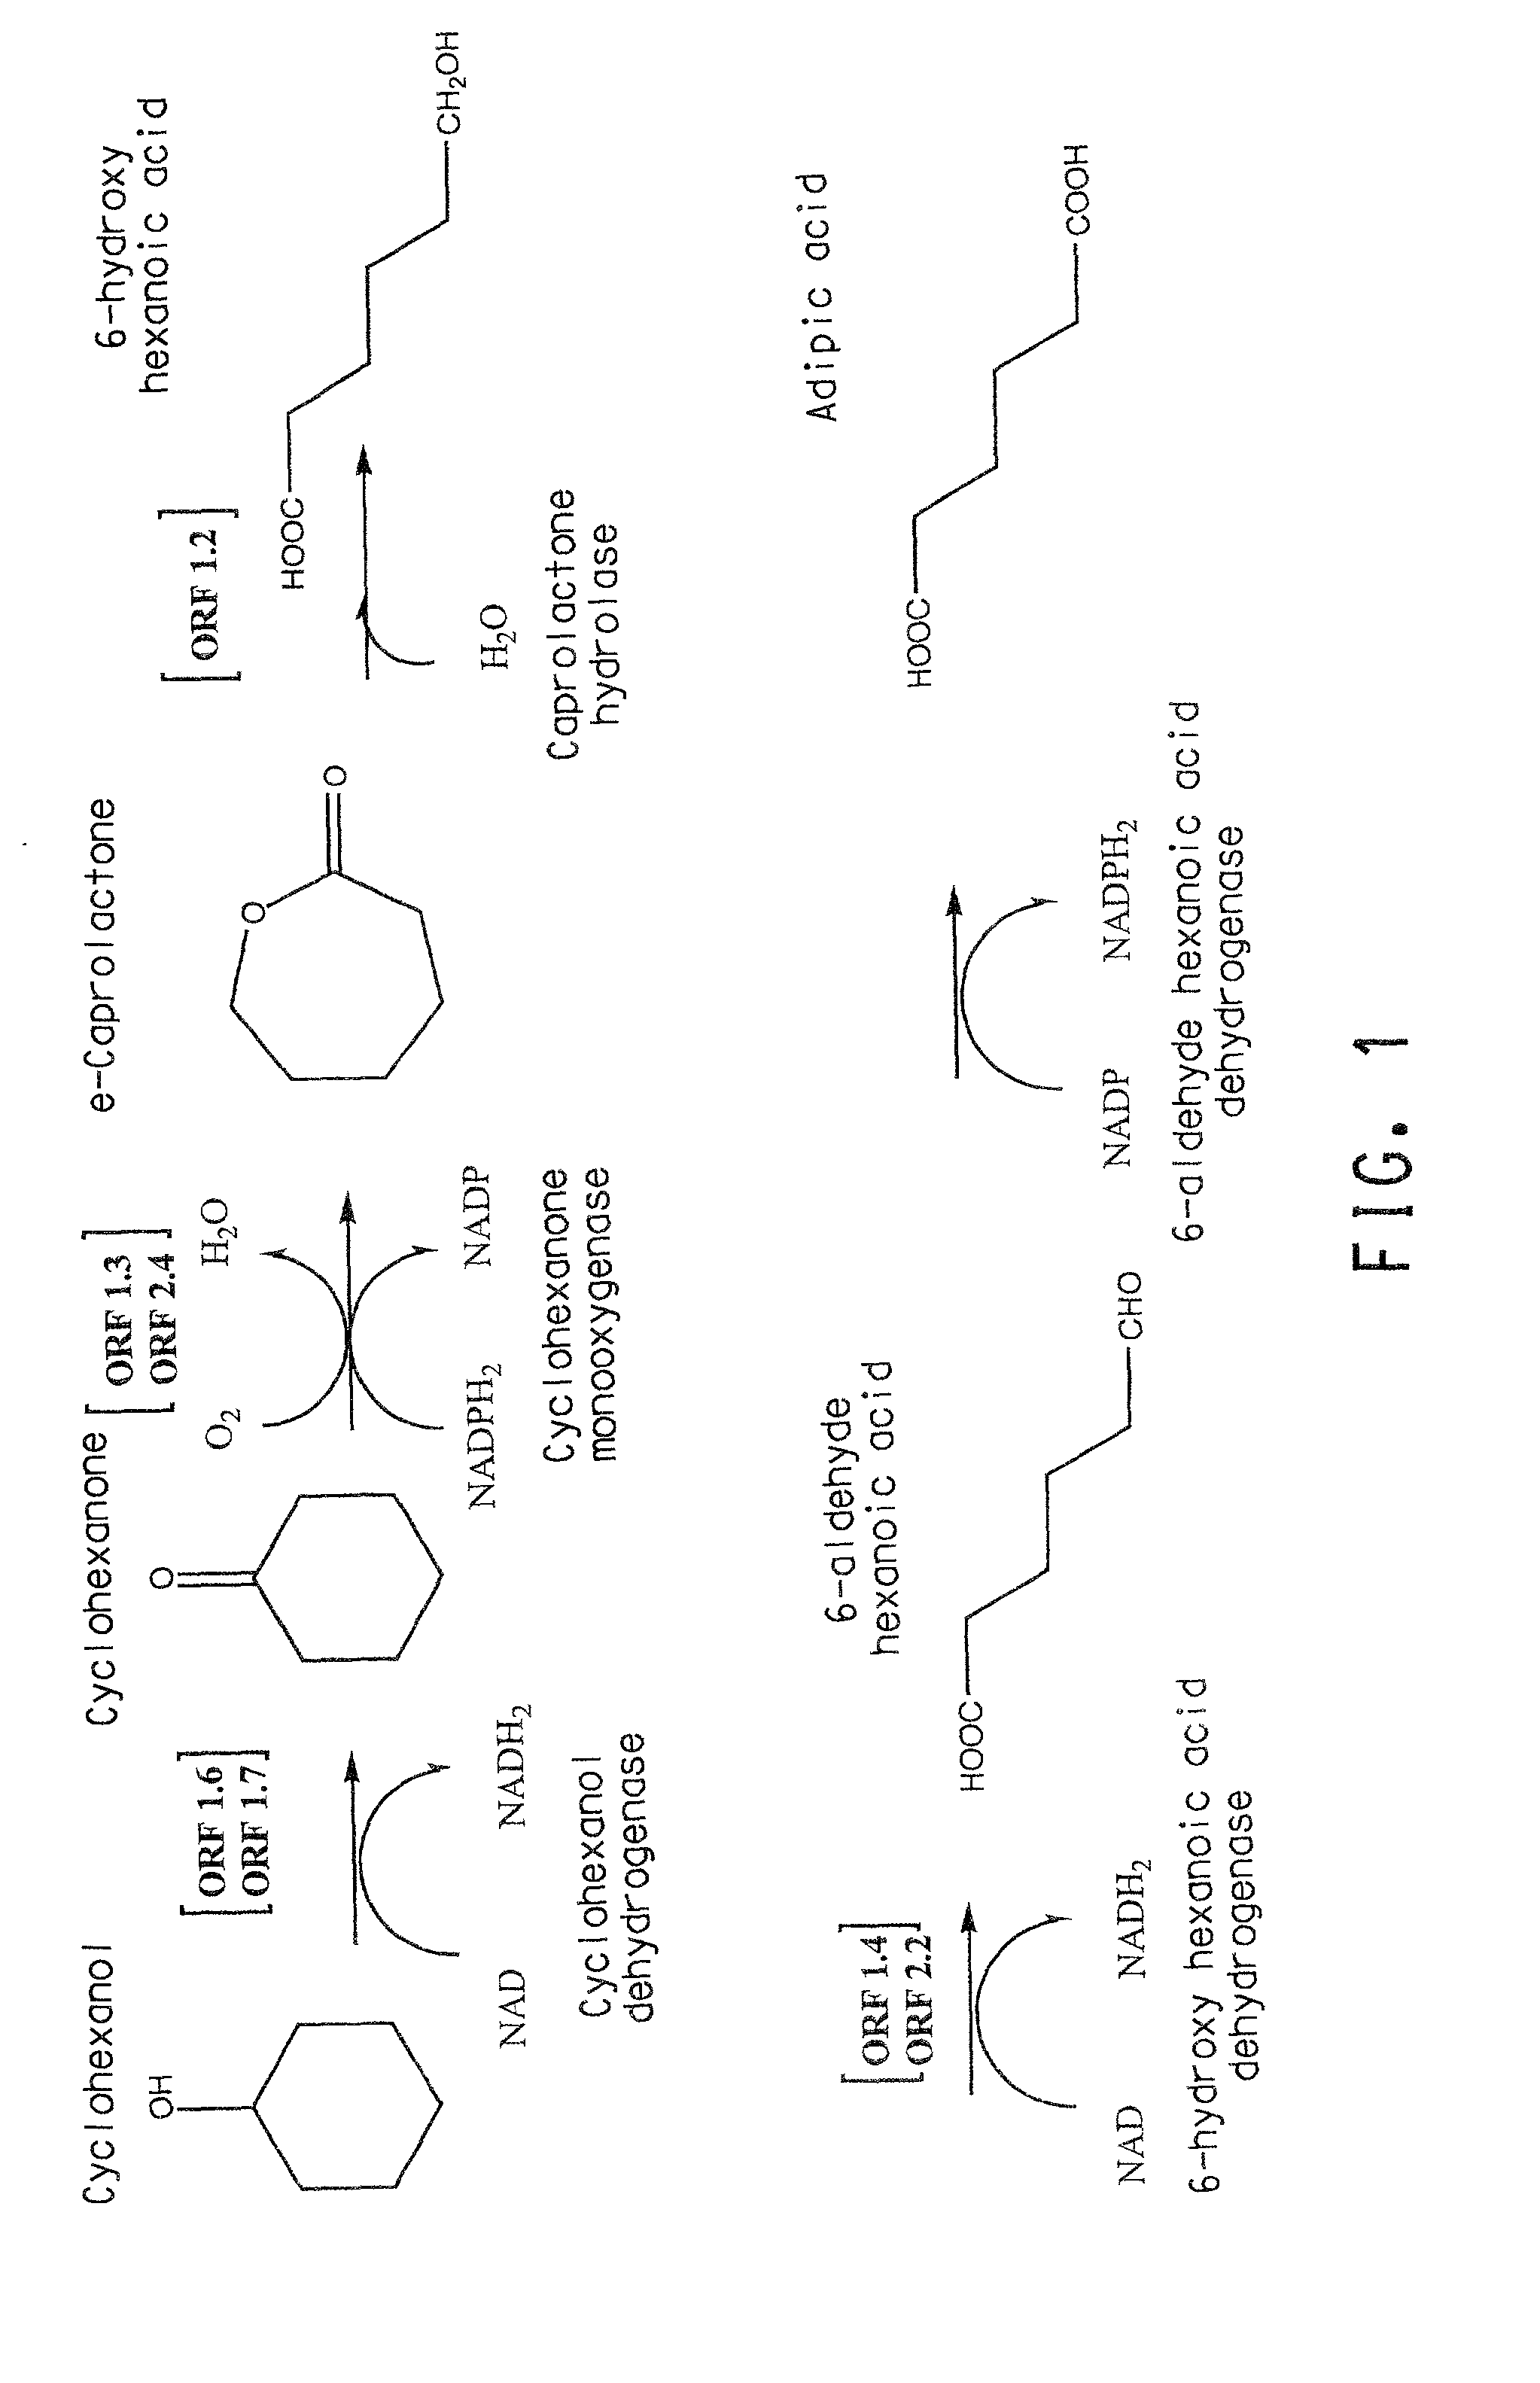 Genes and enzymes for the production of adipic acid intermediates